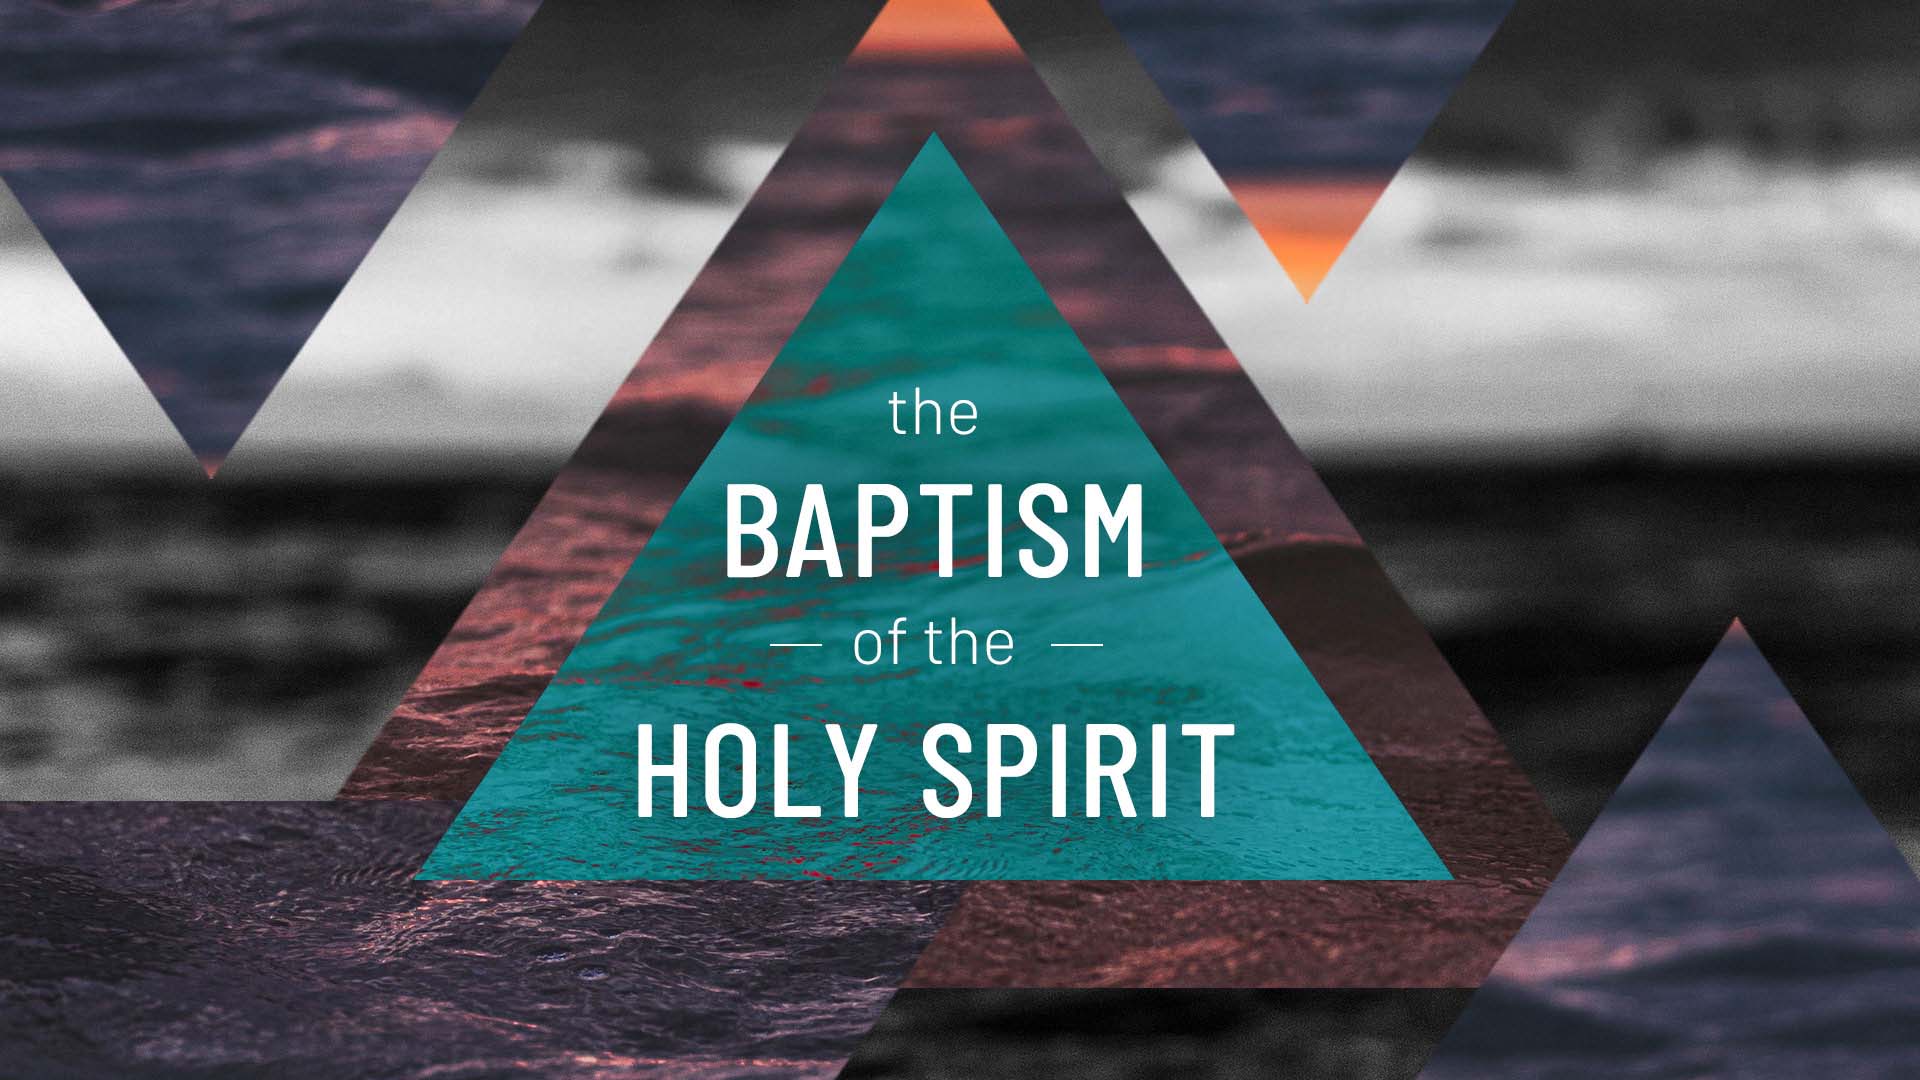 The Baptism vs The Indwelling of the Holy Spirit